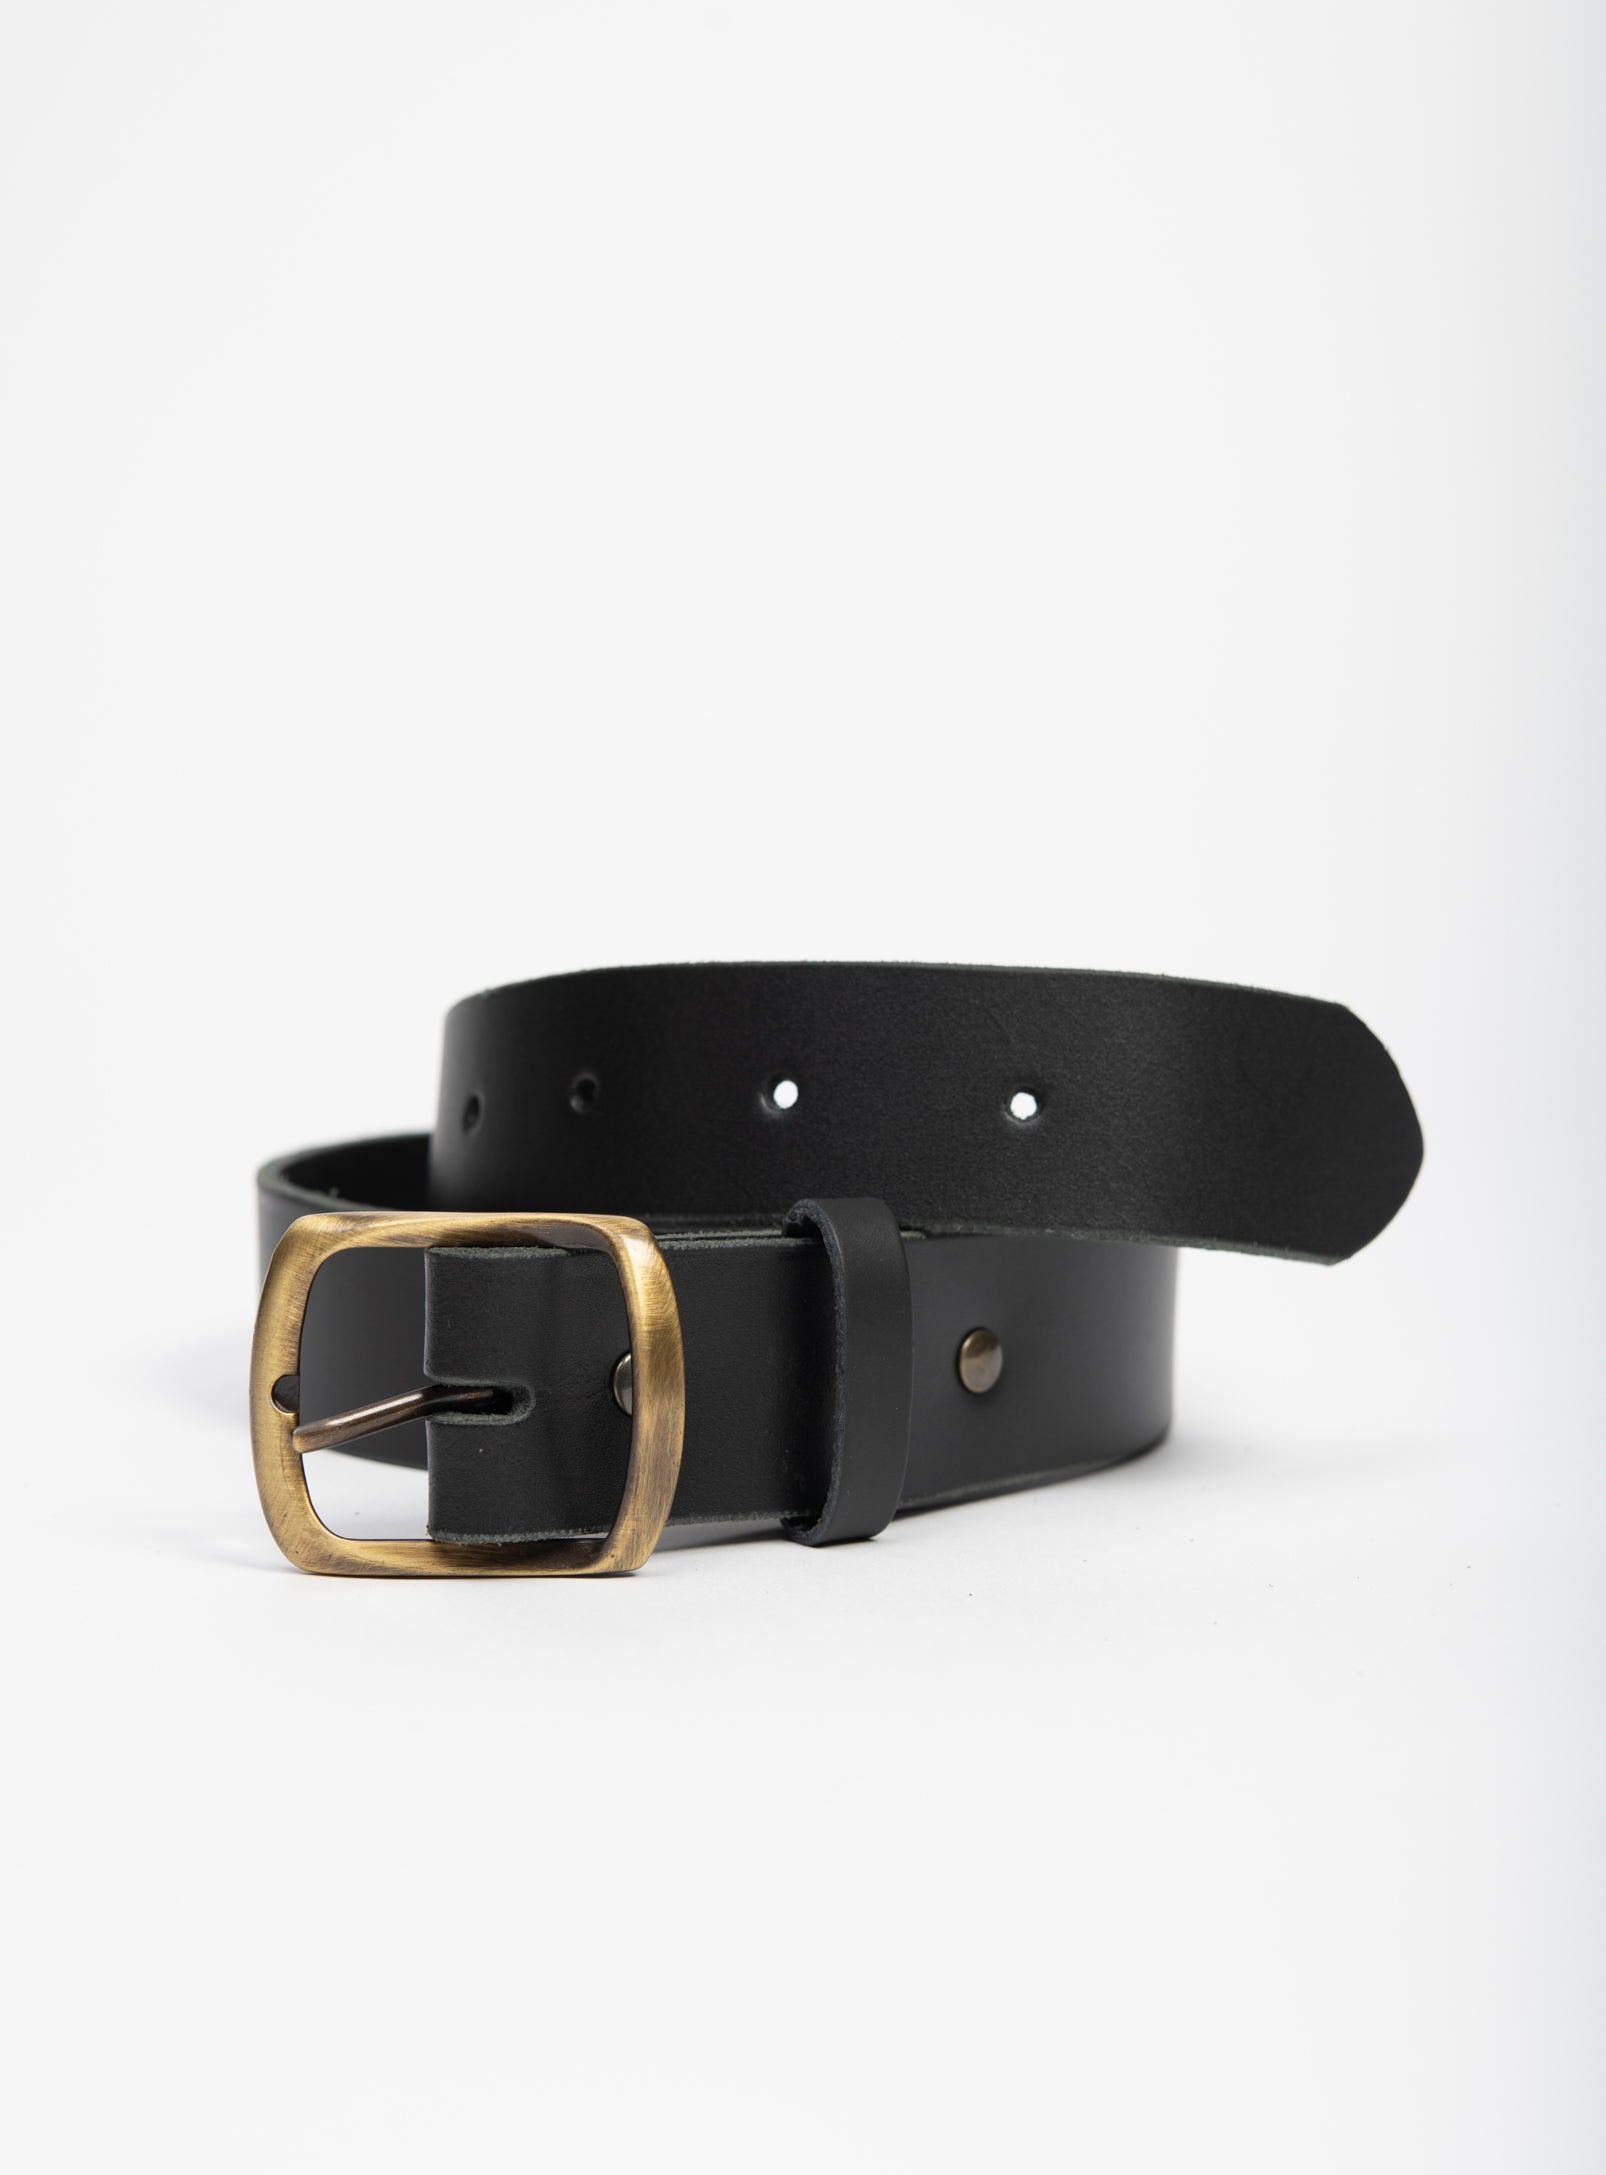 Leather belt with solid brass buckle by VEINAGE – Veinage